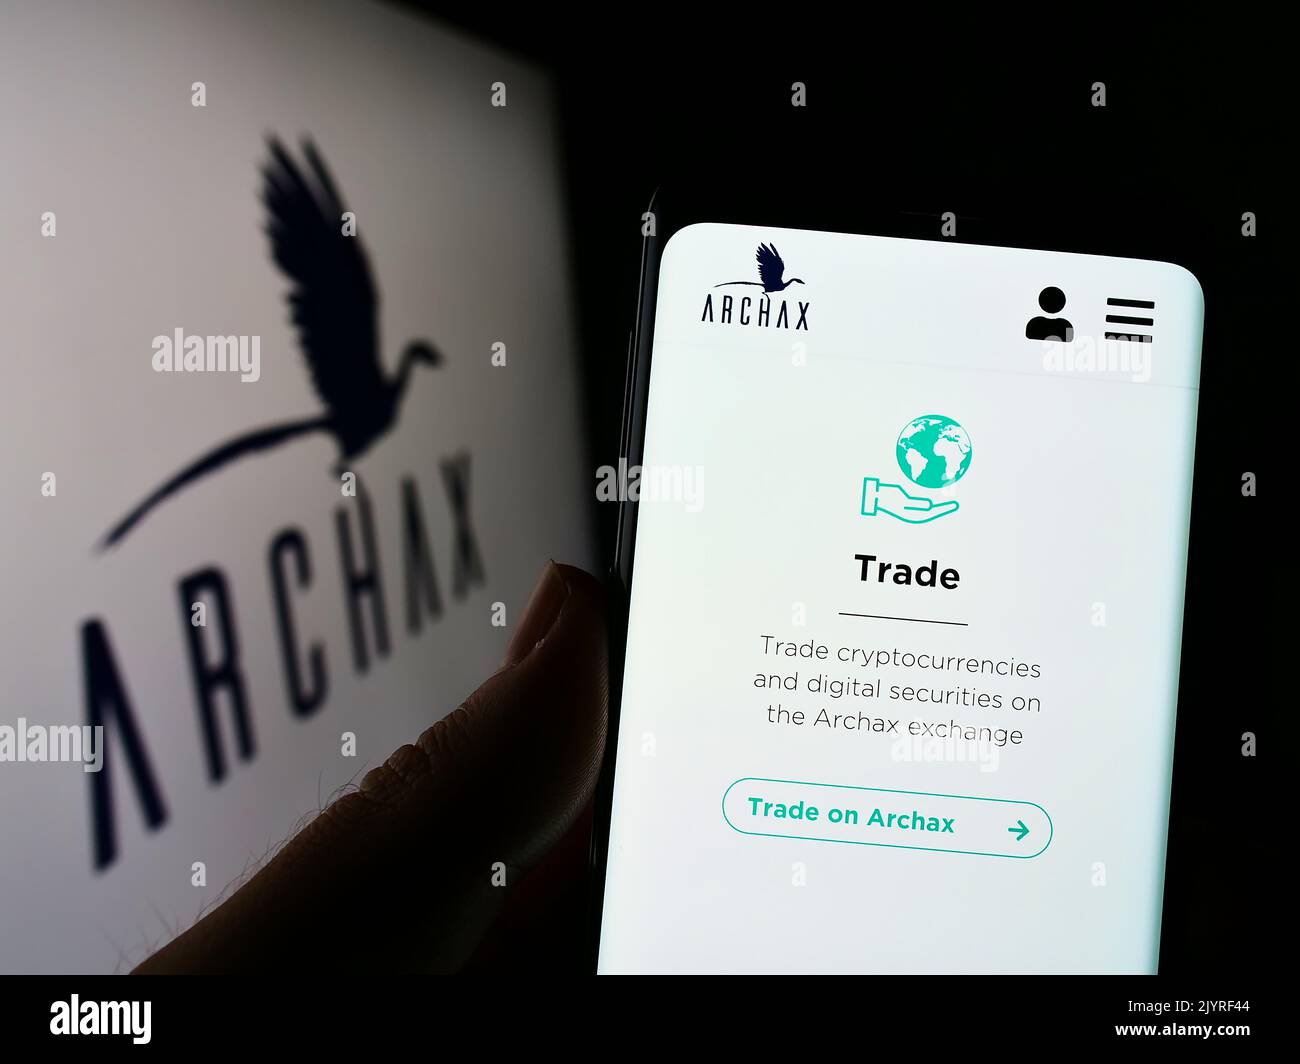 Person holding cellphone with website of British crypto company Archax Ltd. on screen in front of business  logo. Focus on center of phone display. Stock Photo